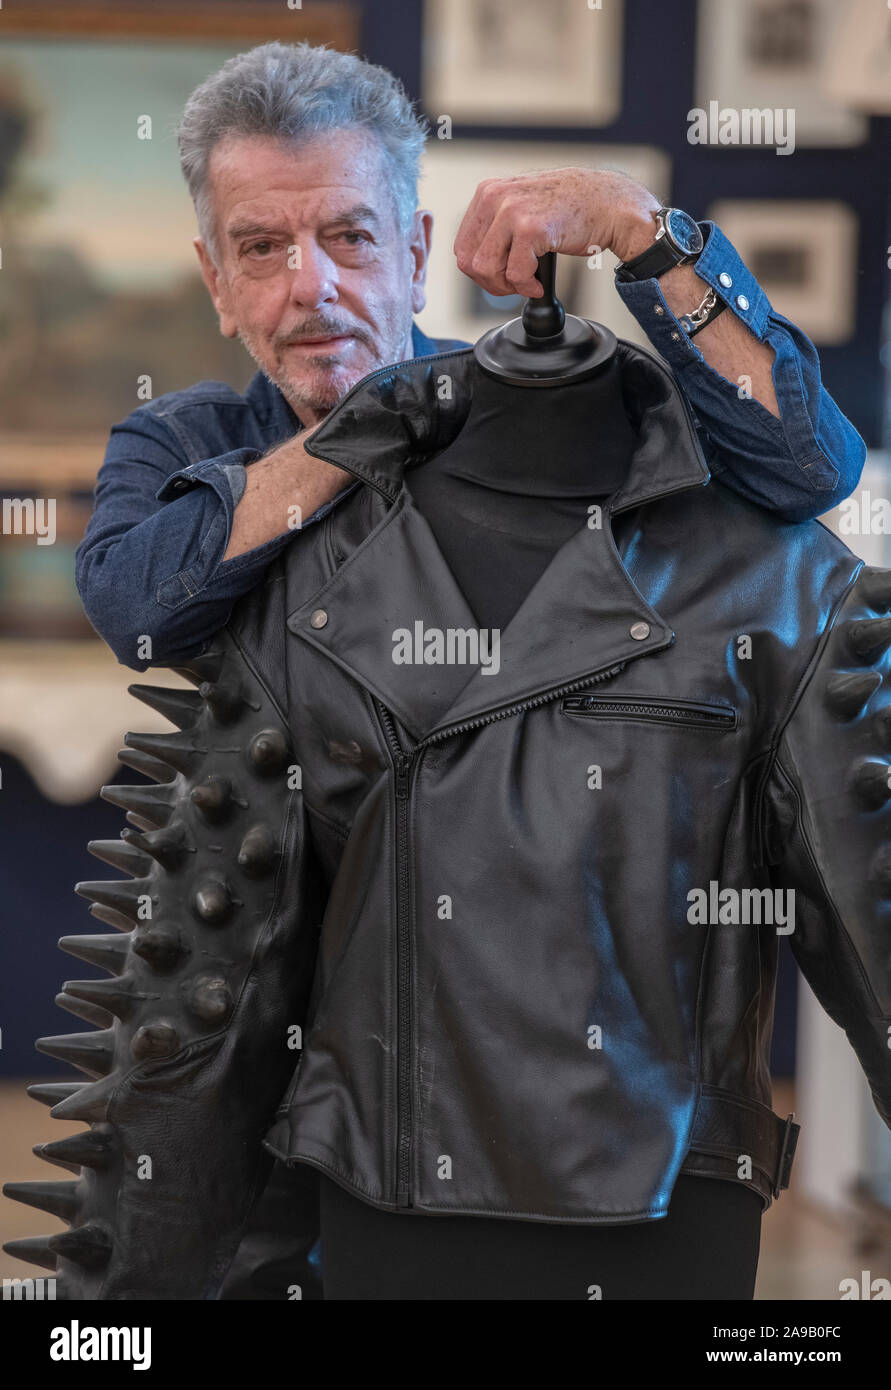 Bonhams, London, UK. 14th November 2019. Nicky Haslam, one of the world’s most celebrated interior designers, attends a photo call at Bonhams for the sale of his impressive collection from the Hunting Lodge in Hampshire, where Haslam has lived since 1978. Image: Nicky Haslam with a Craig Morrison jacket, which will be sold with a Terence Donovan print of Haslam wearing the same jacket in 1992. Estimate: £500-700. Credit: Malcolm Park/Alamy Live News. Stock Photo